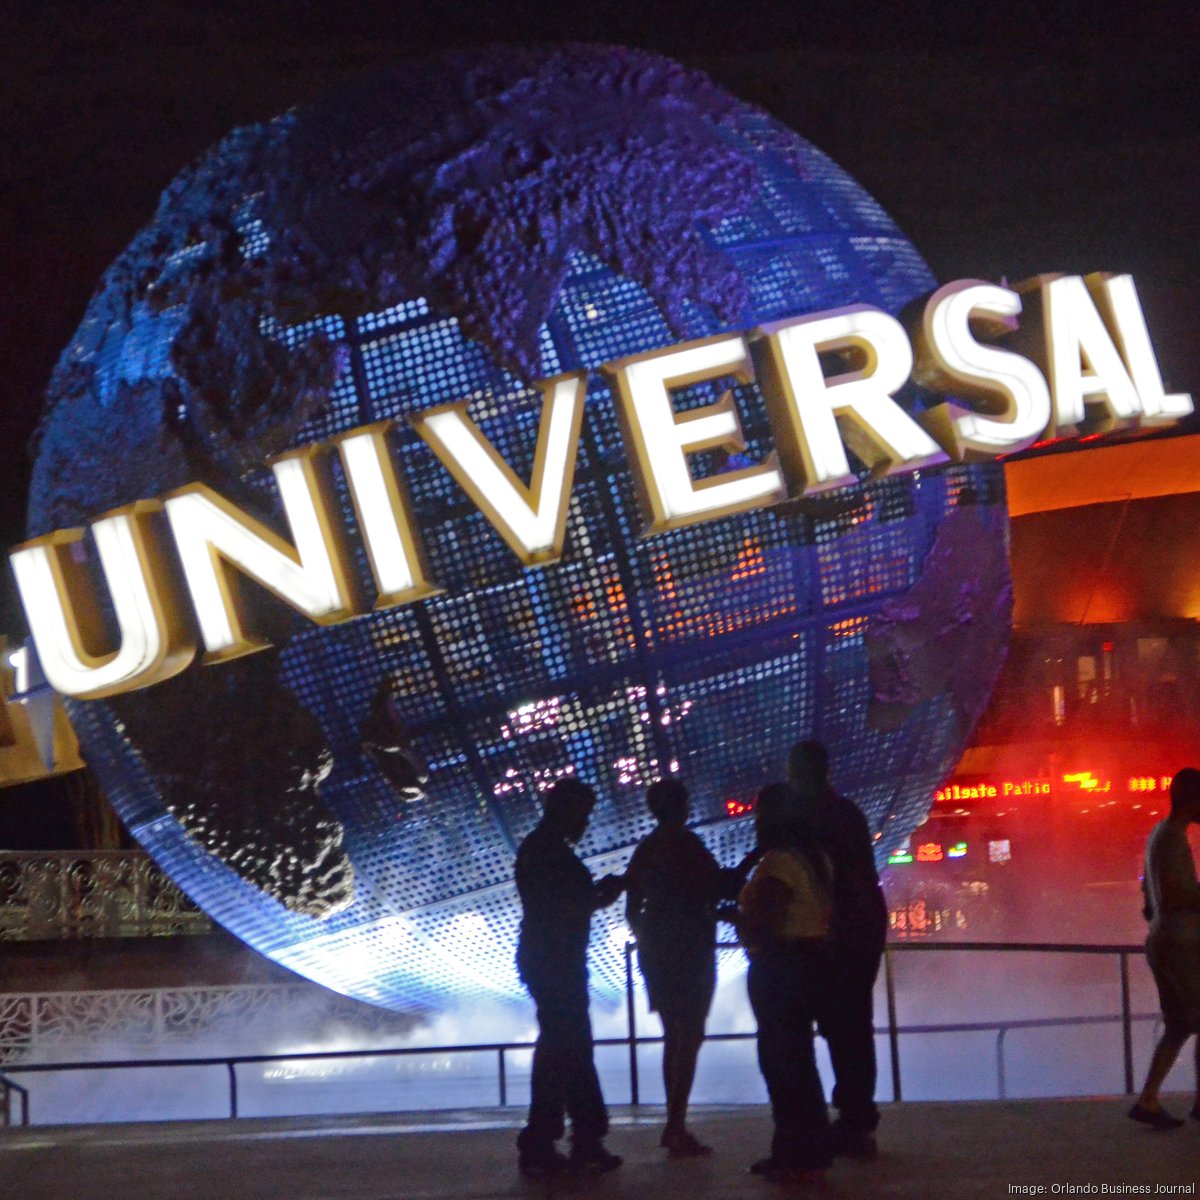 What We Can Learn About Universal Orlando's New Theme Park from Development  Plans – Orlando ParkStop